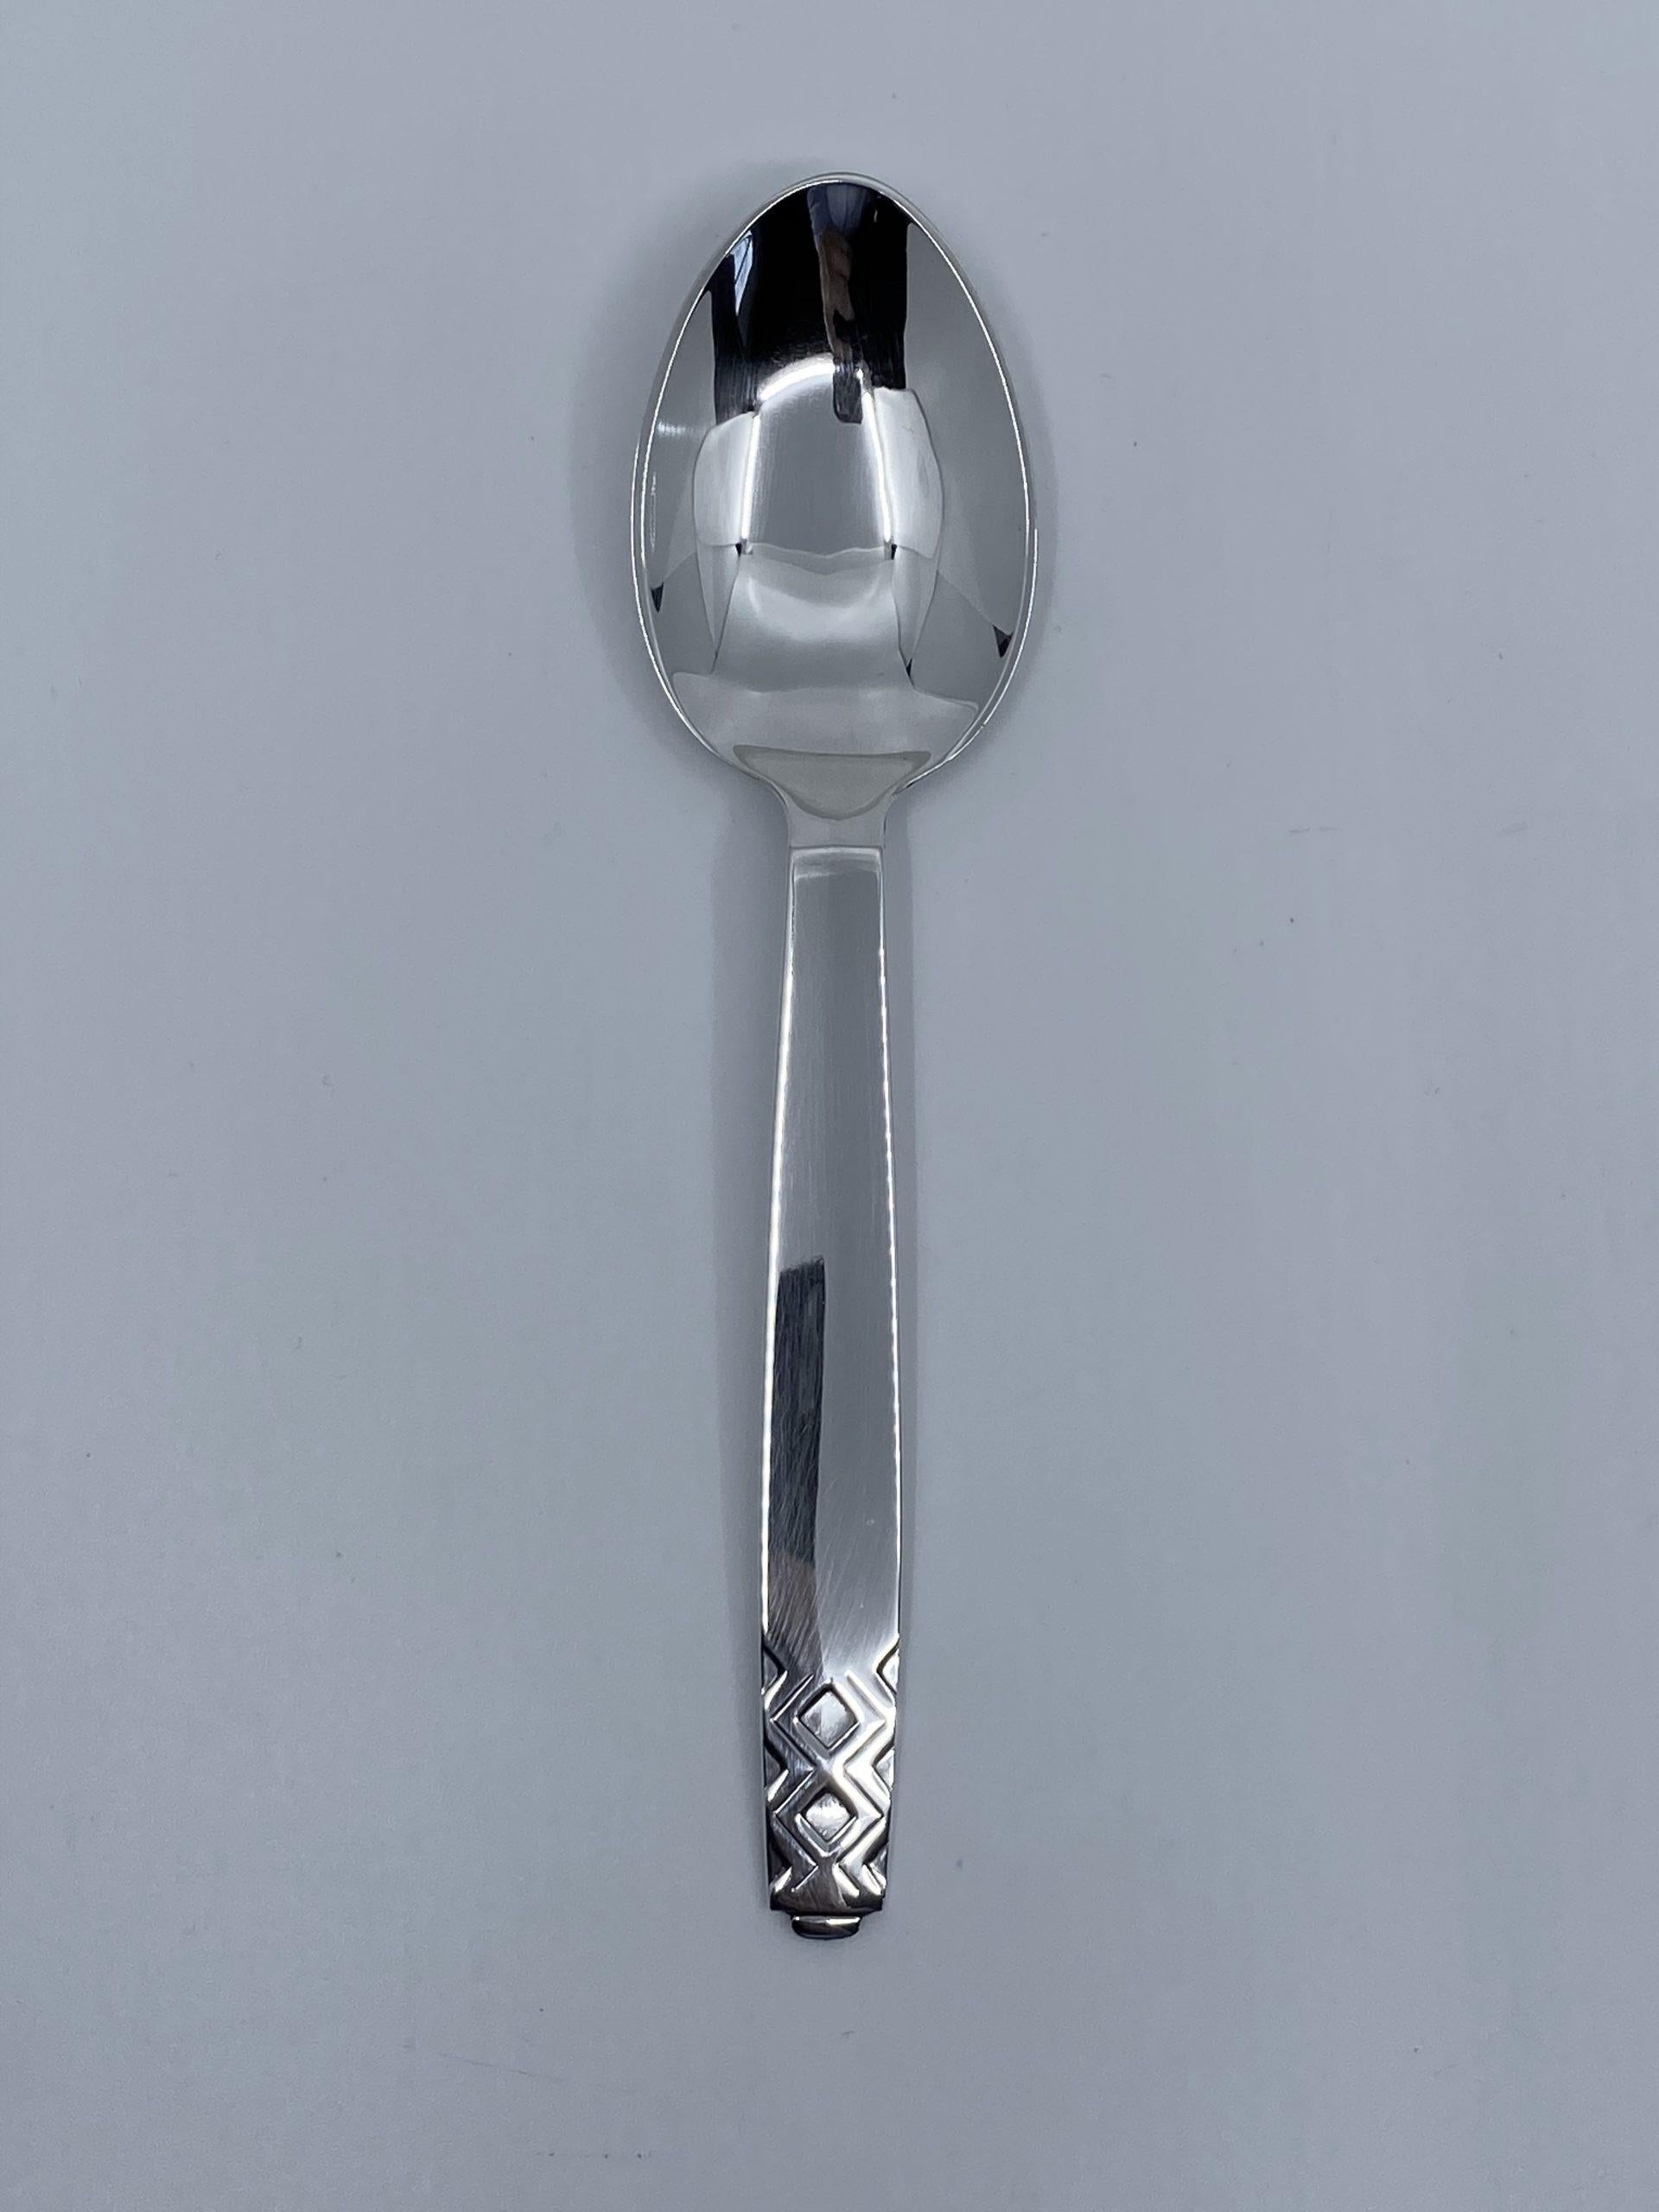 Sterling silver Georg Jensen dinner spoon, item 021 in the Mayan Pattern, design #56 by Johan Rohde from 1937.

Additional information:
Material: Sterling silver
Styles: Art Deco
Hallmarks: With Georg Jensen hallmark, made in Denmark.
Dimensions: